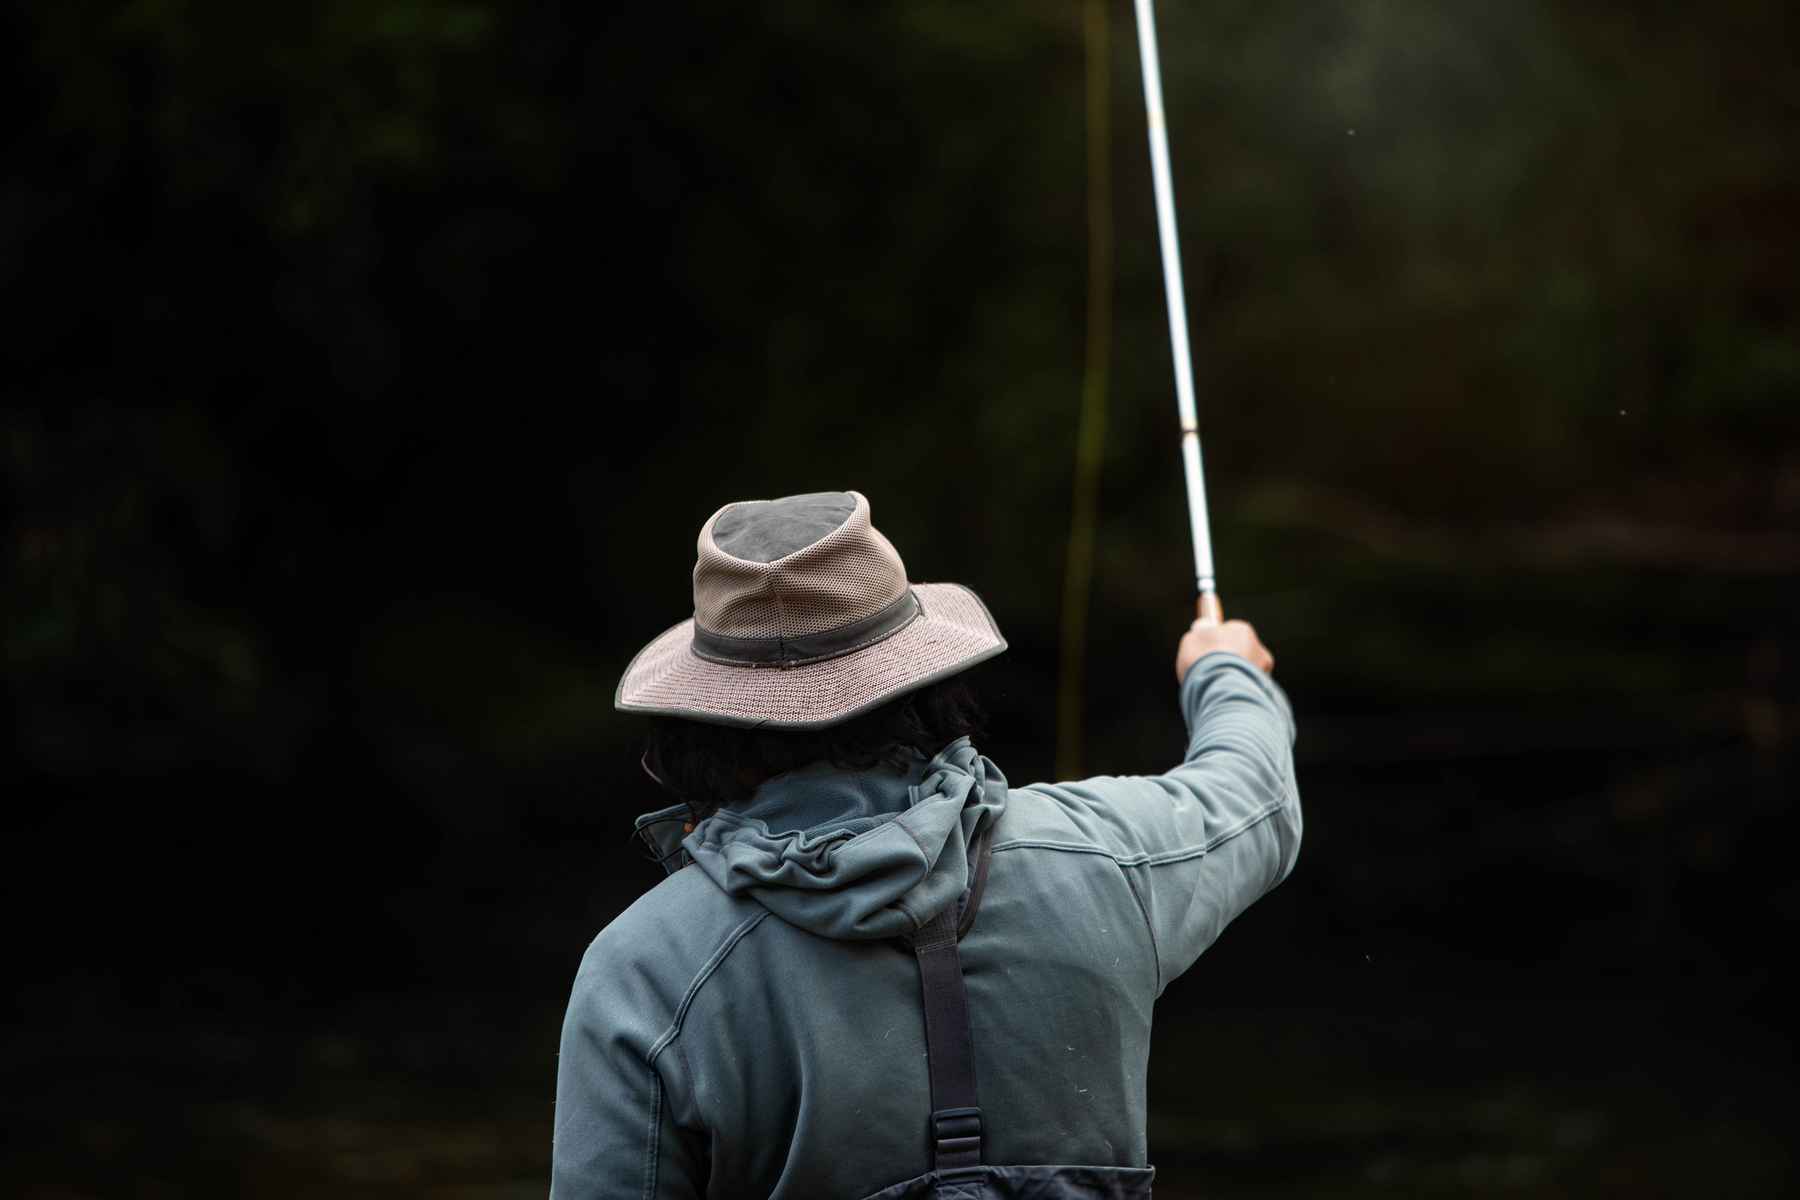 Fixed-Line Fly Fishing